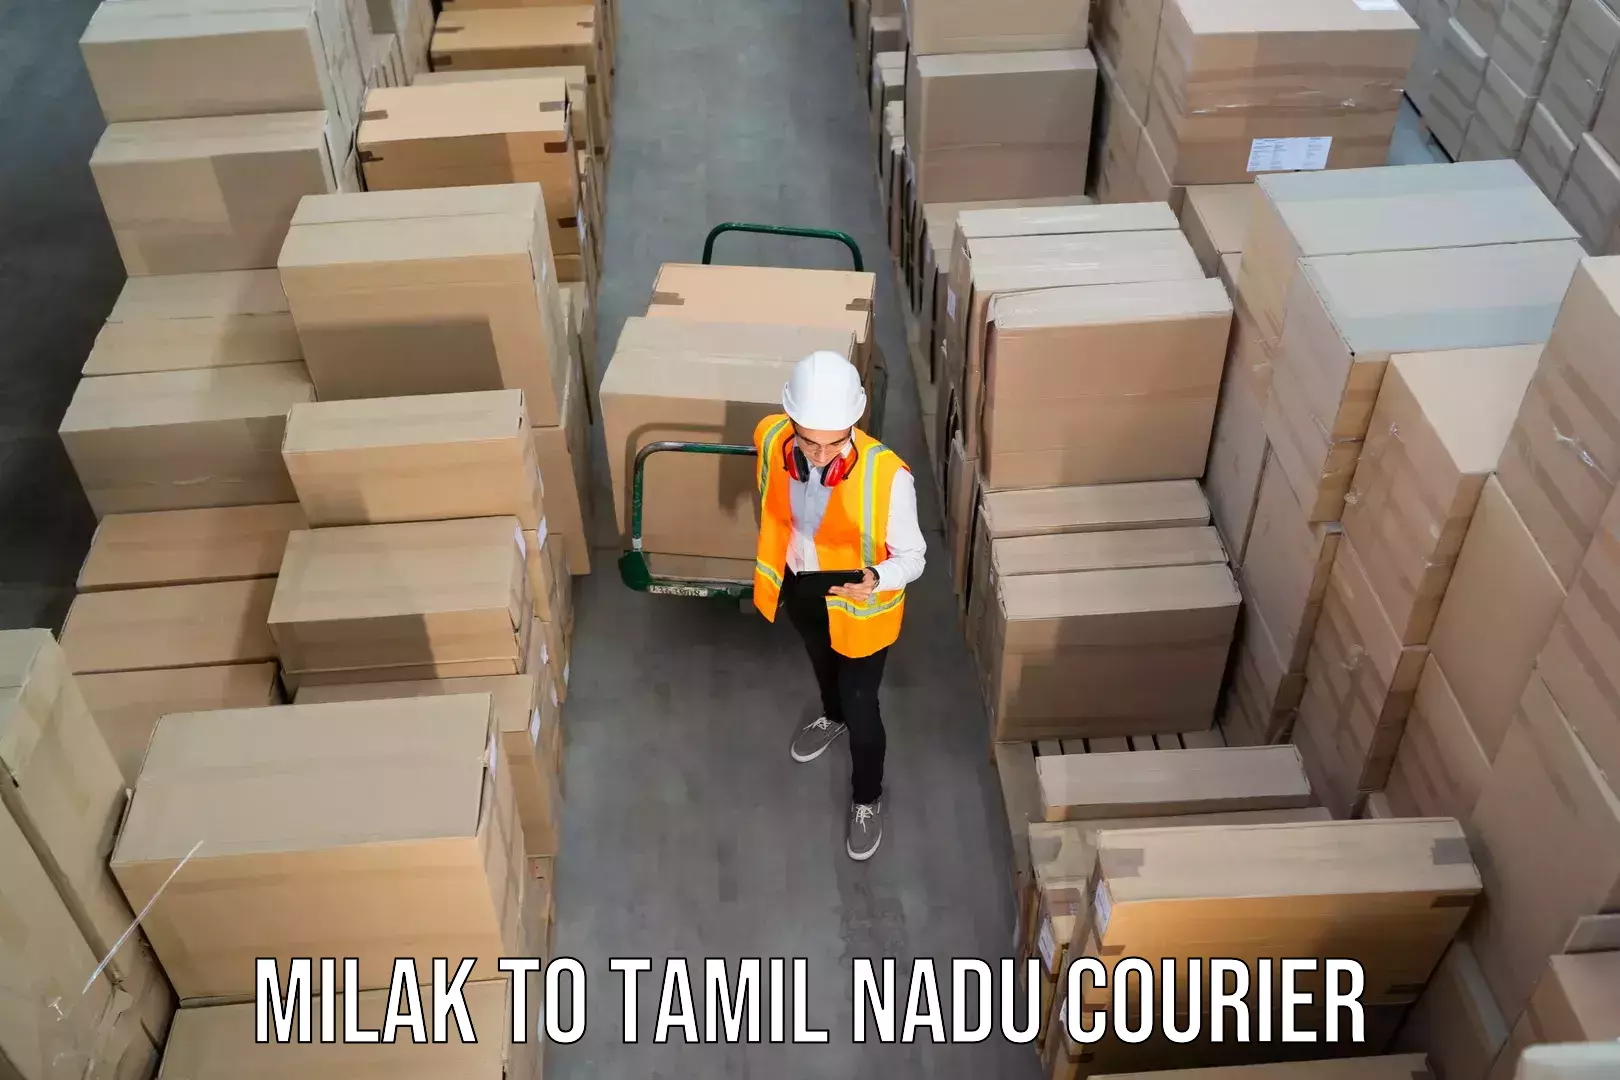 24-hour courier service Milak to Periyakulam